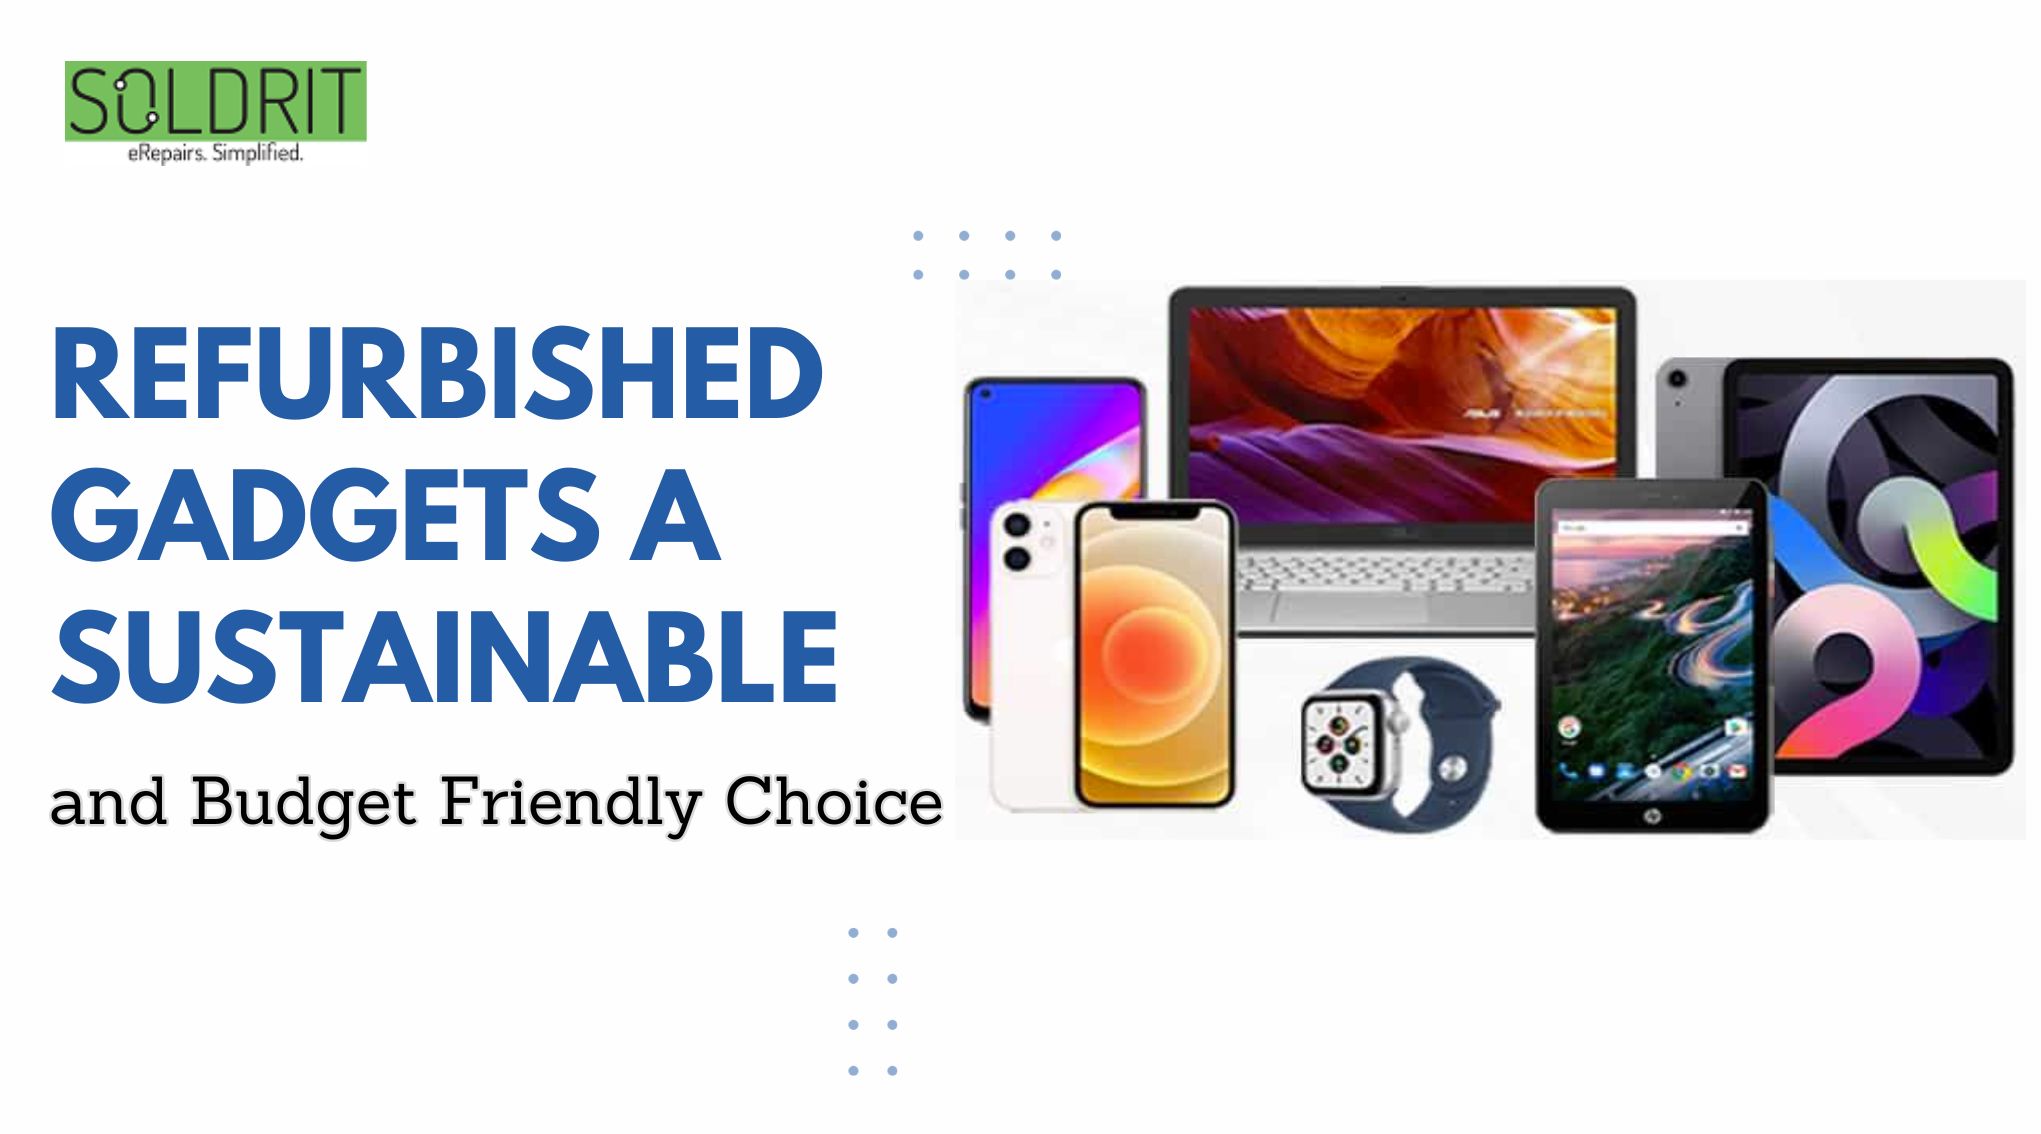 Refurbished Gadgets A Sustainable and Budget Friendly Choice